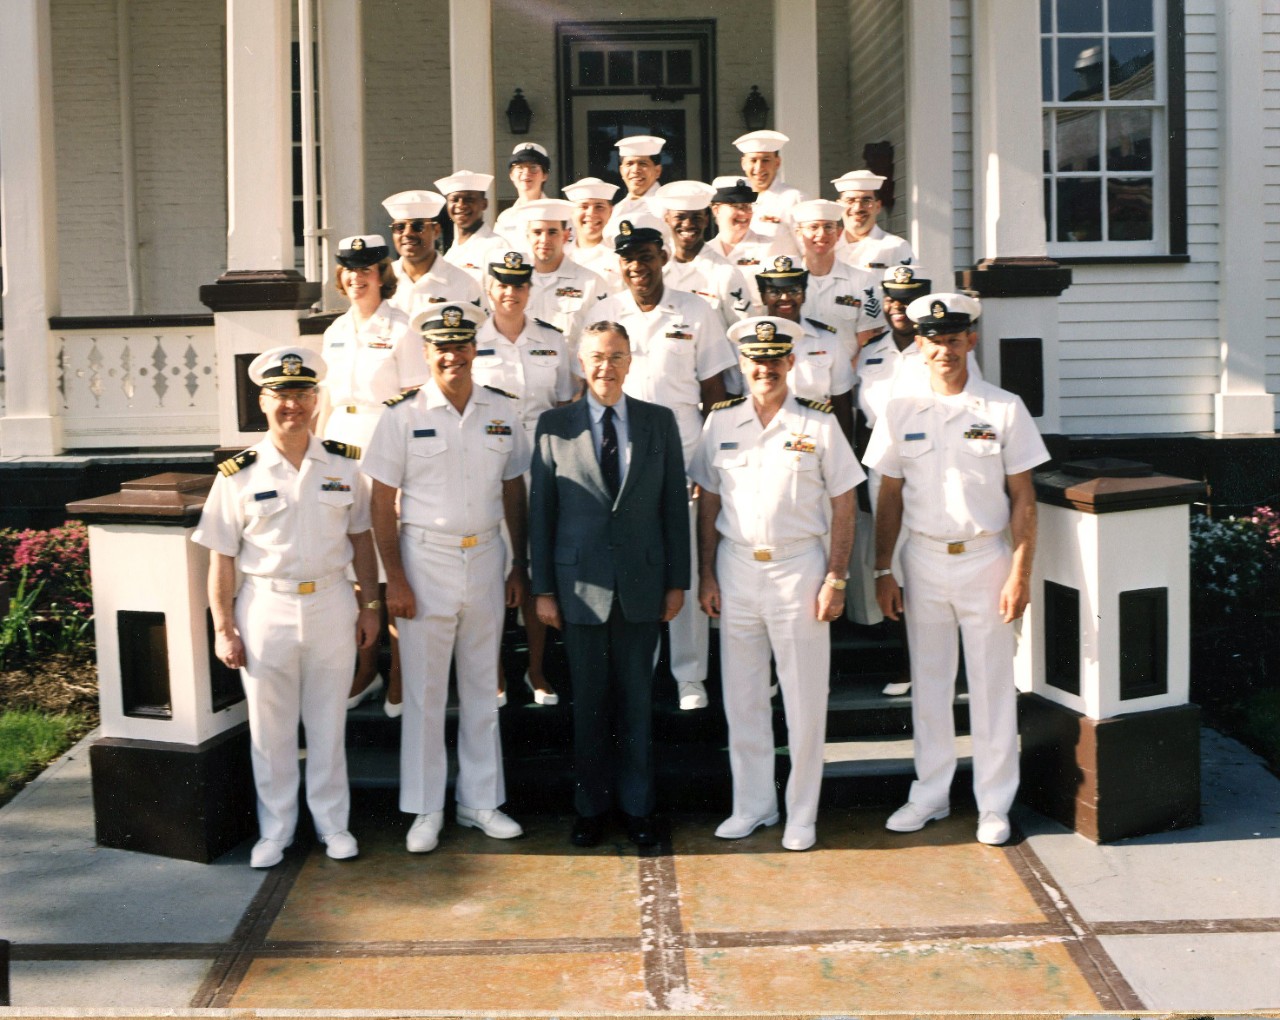 Dr. Dean Allard pictured (center) on the Washington Navy Yard in an undated photo with several Sailors in their dress whites. Dr. Allard was the Naval History Director from 1989-1995. 